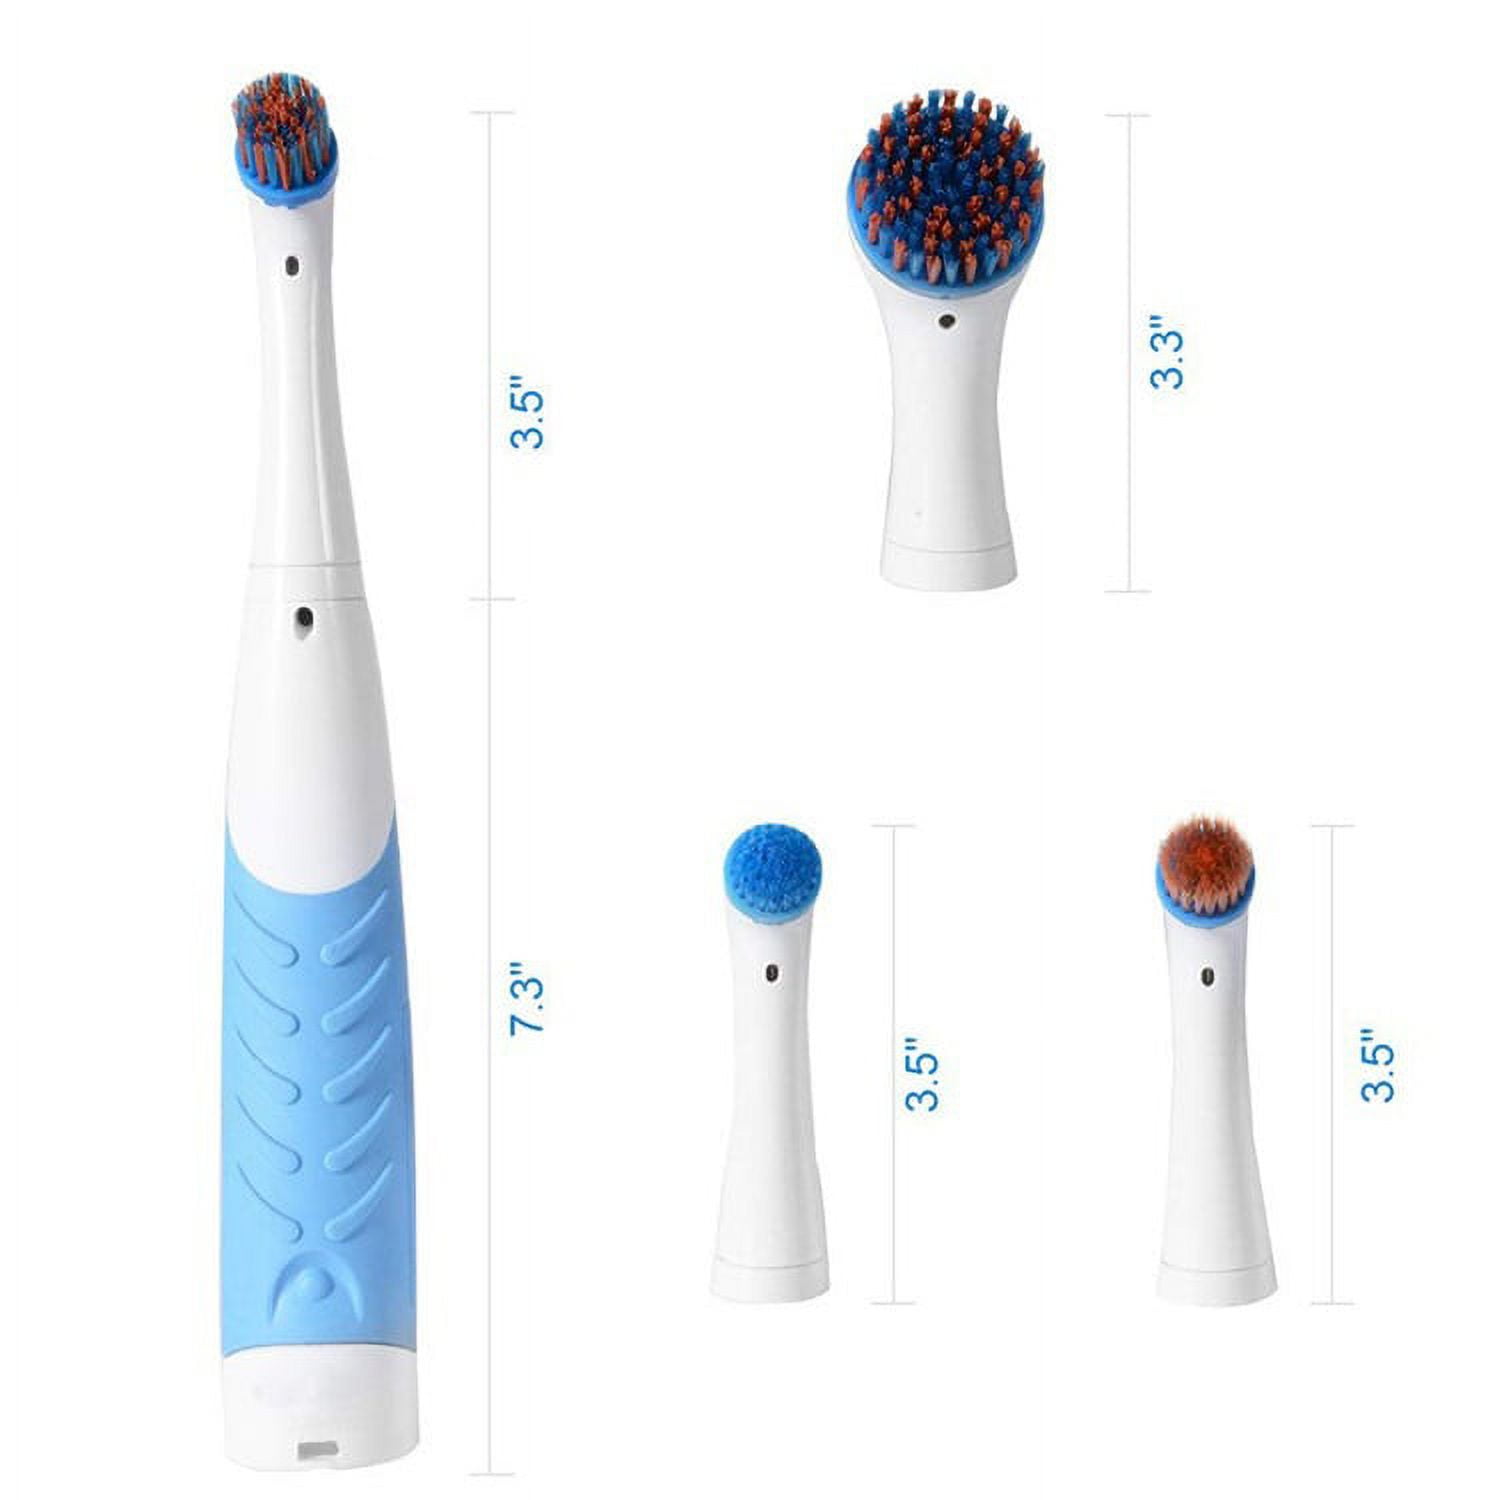 Sonic Scrubber Interchangeable Brushes Bathroom Cleaning Tool Power Cleaner